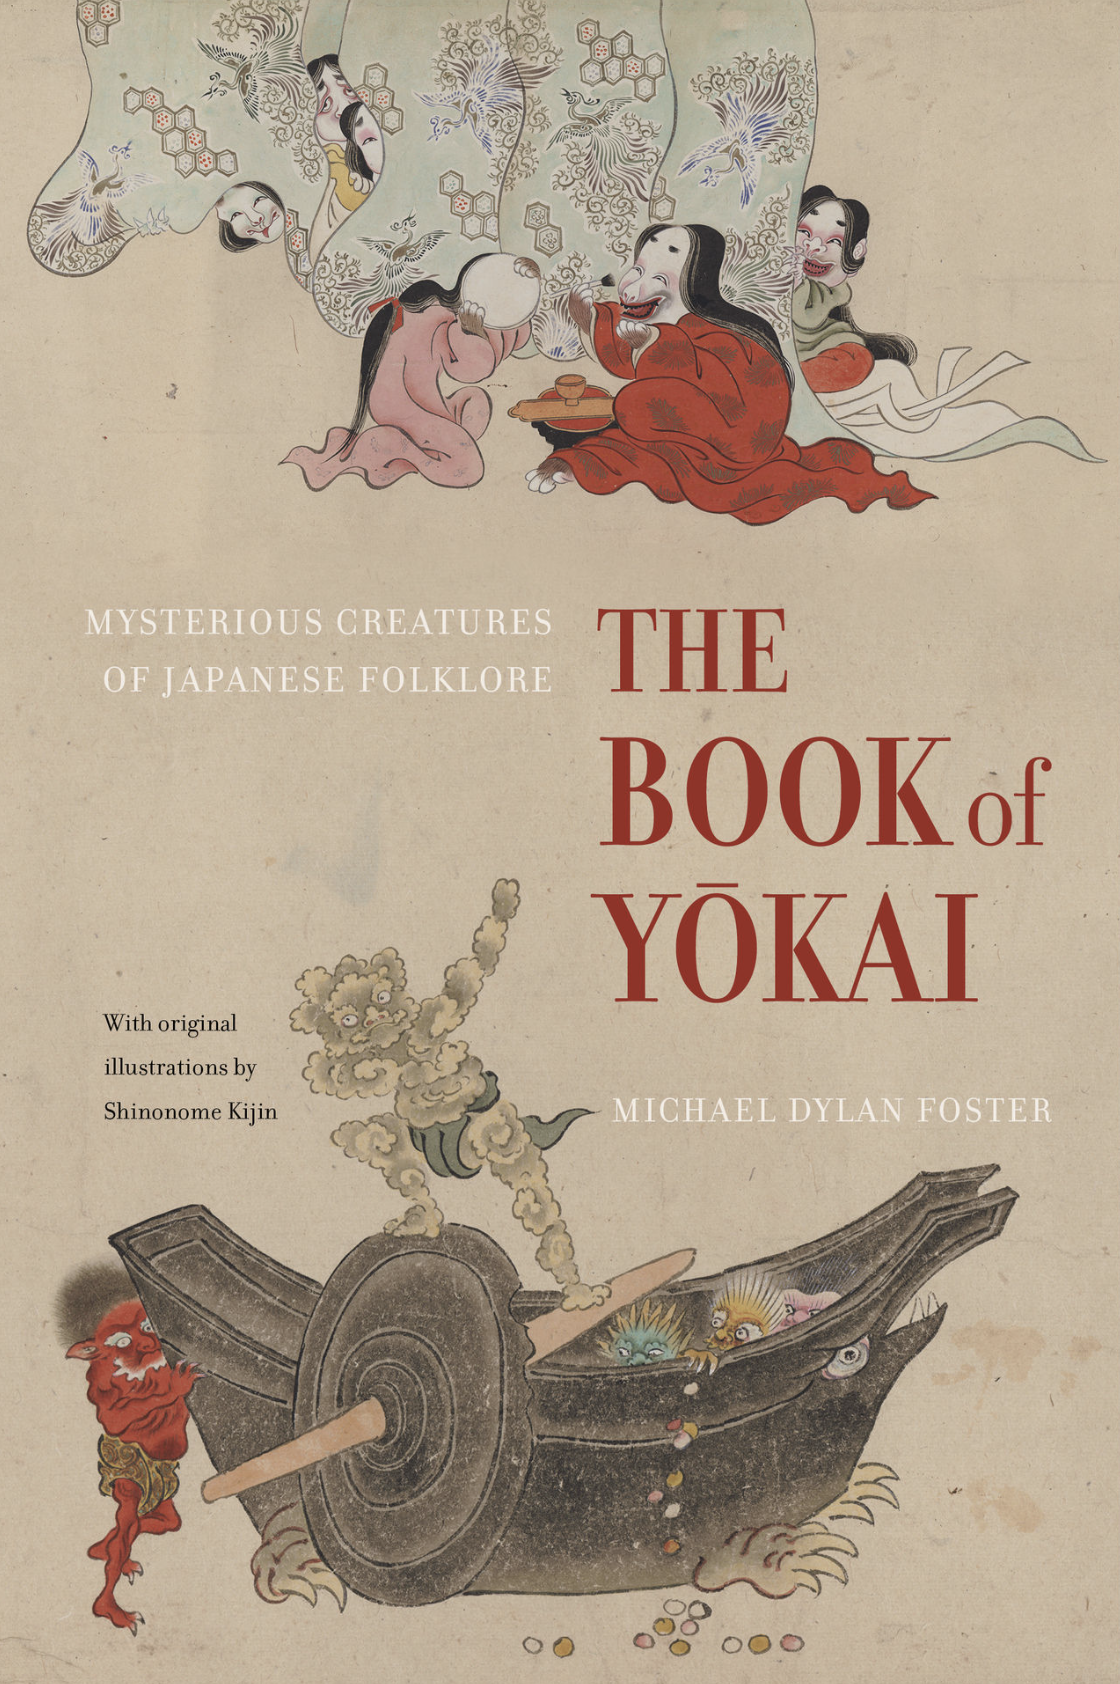 The Book of Yokai by Michael Dylan Foster book cover